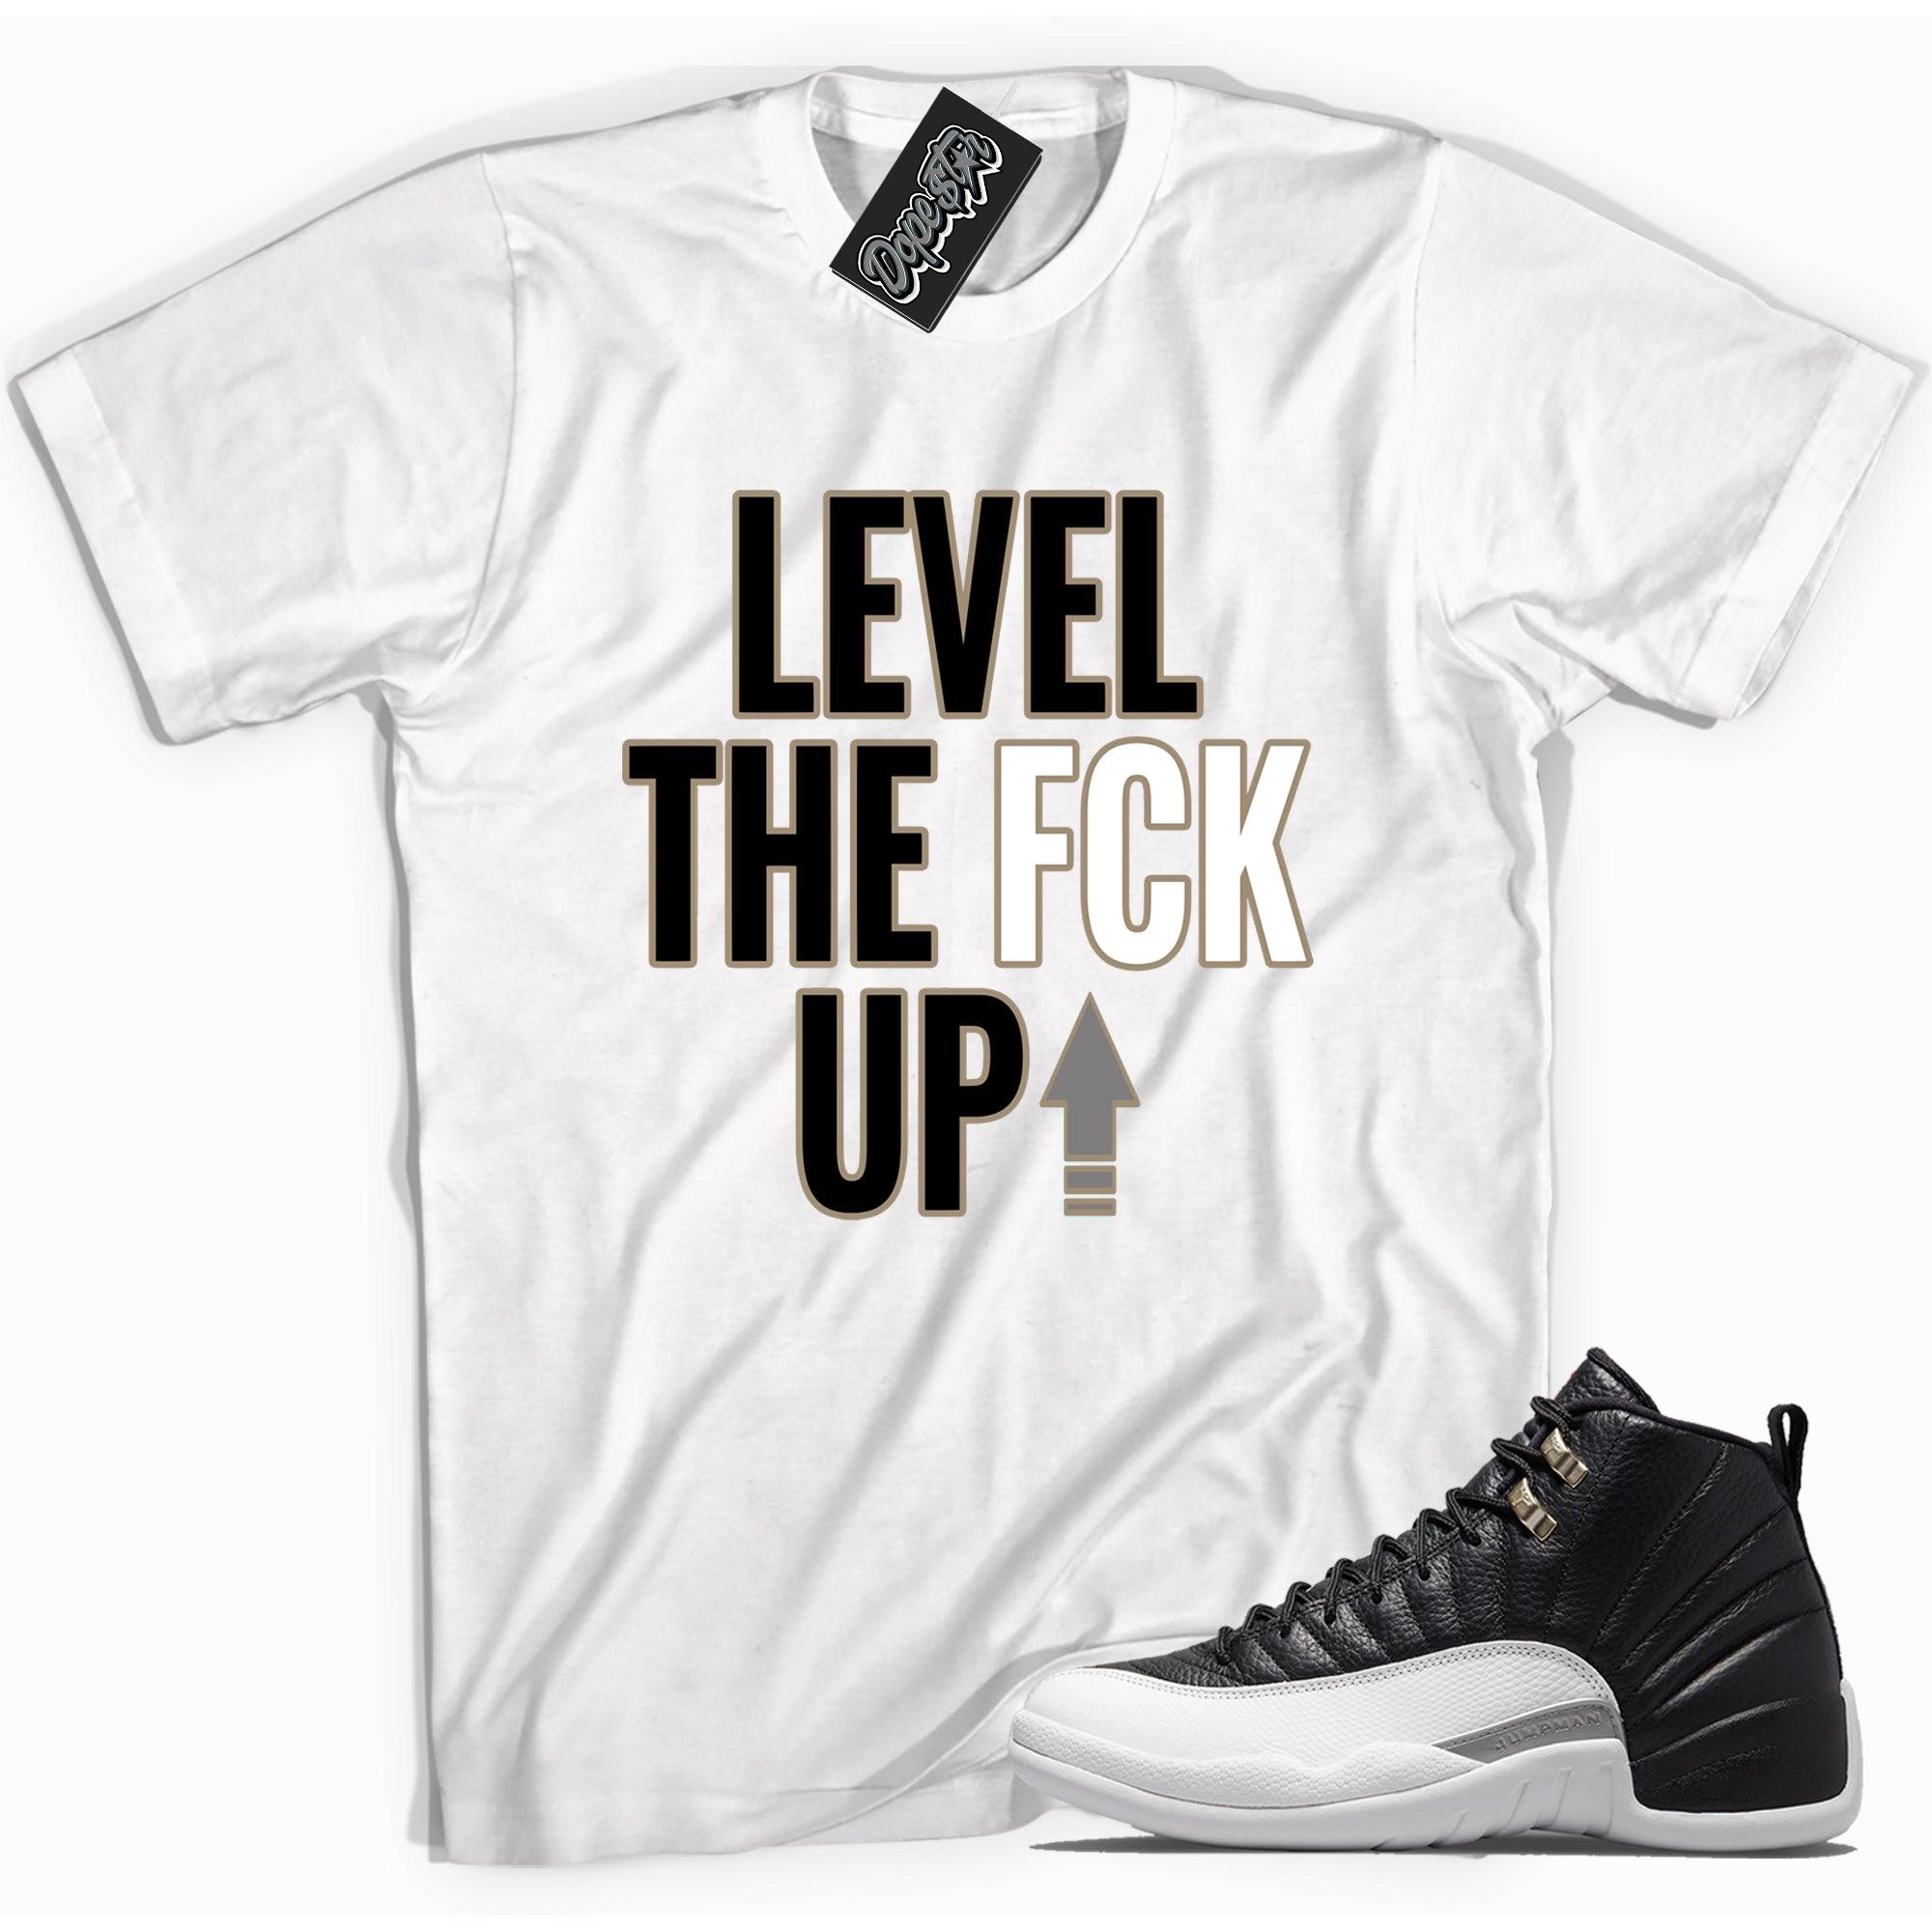 Cool white graphic tee with 'Level Up' print, that perfectly matches Air Jordan 12 Retro Playoffs Toe sneakers.